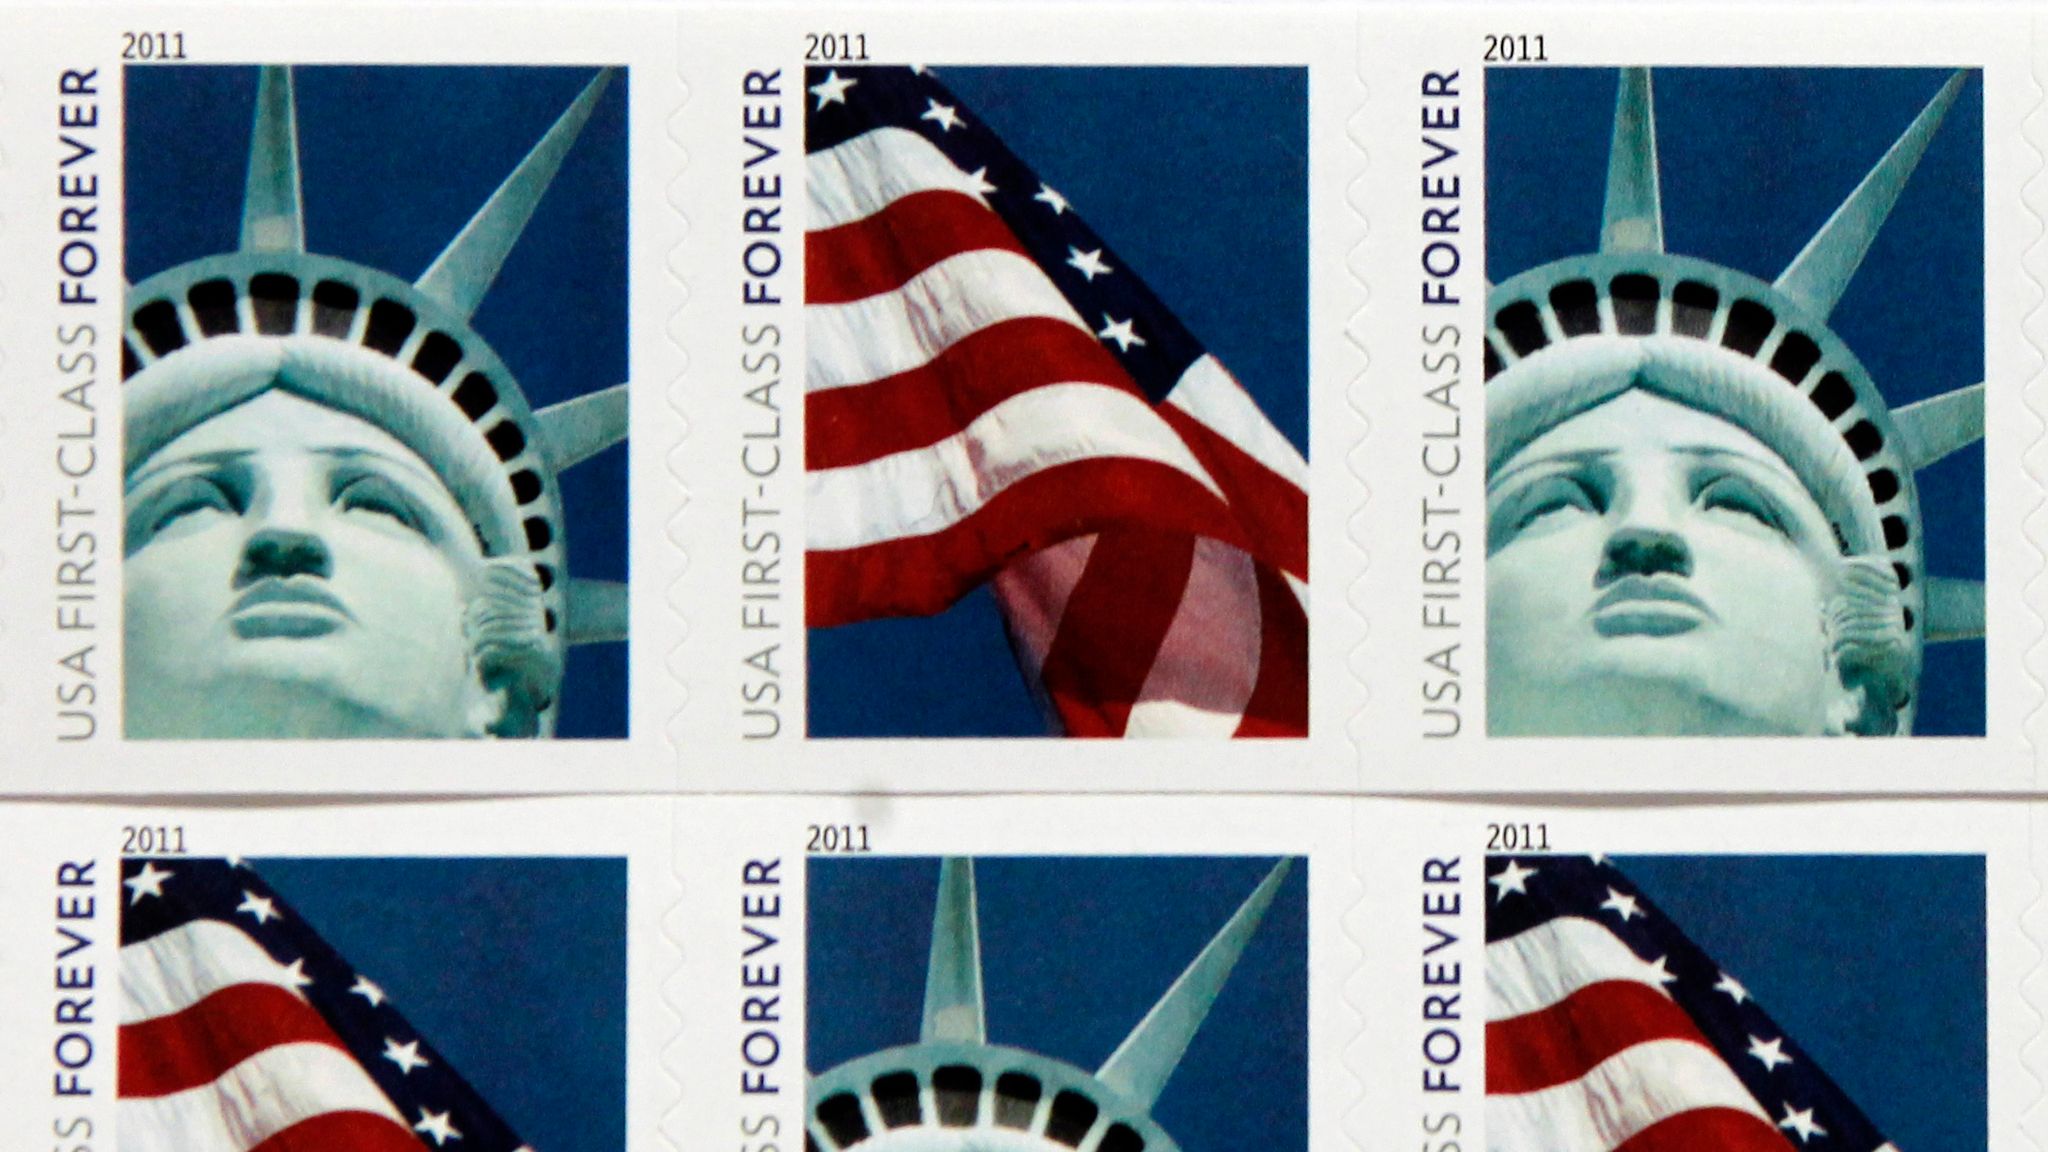 Post Office owes $3.5M for using wrong Statue of Liberty on a stamp